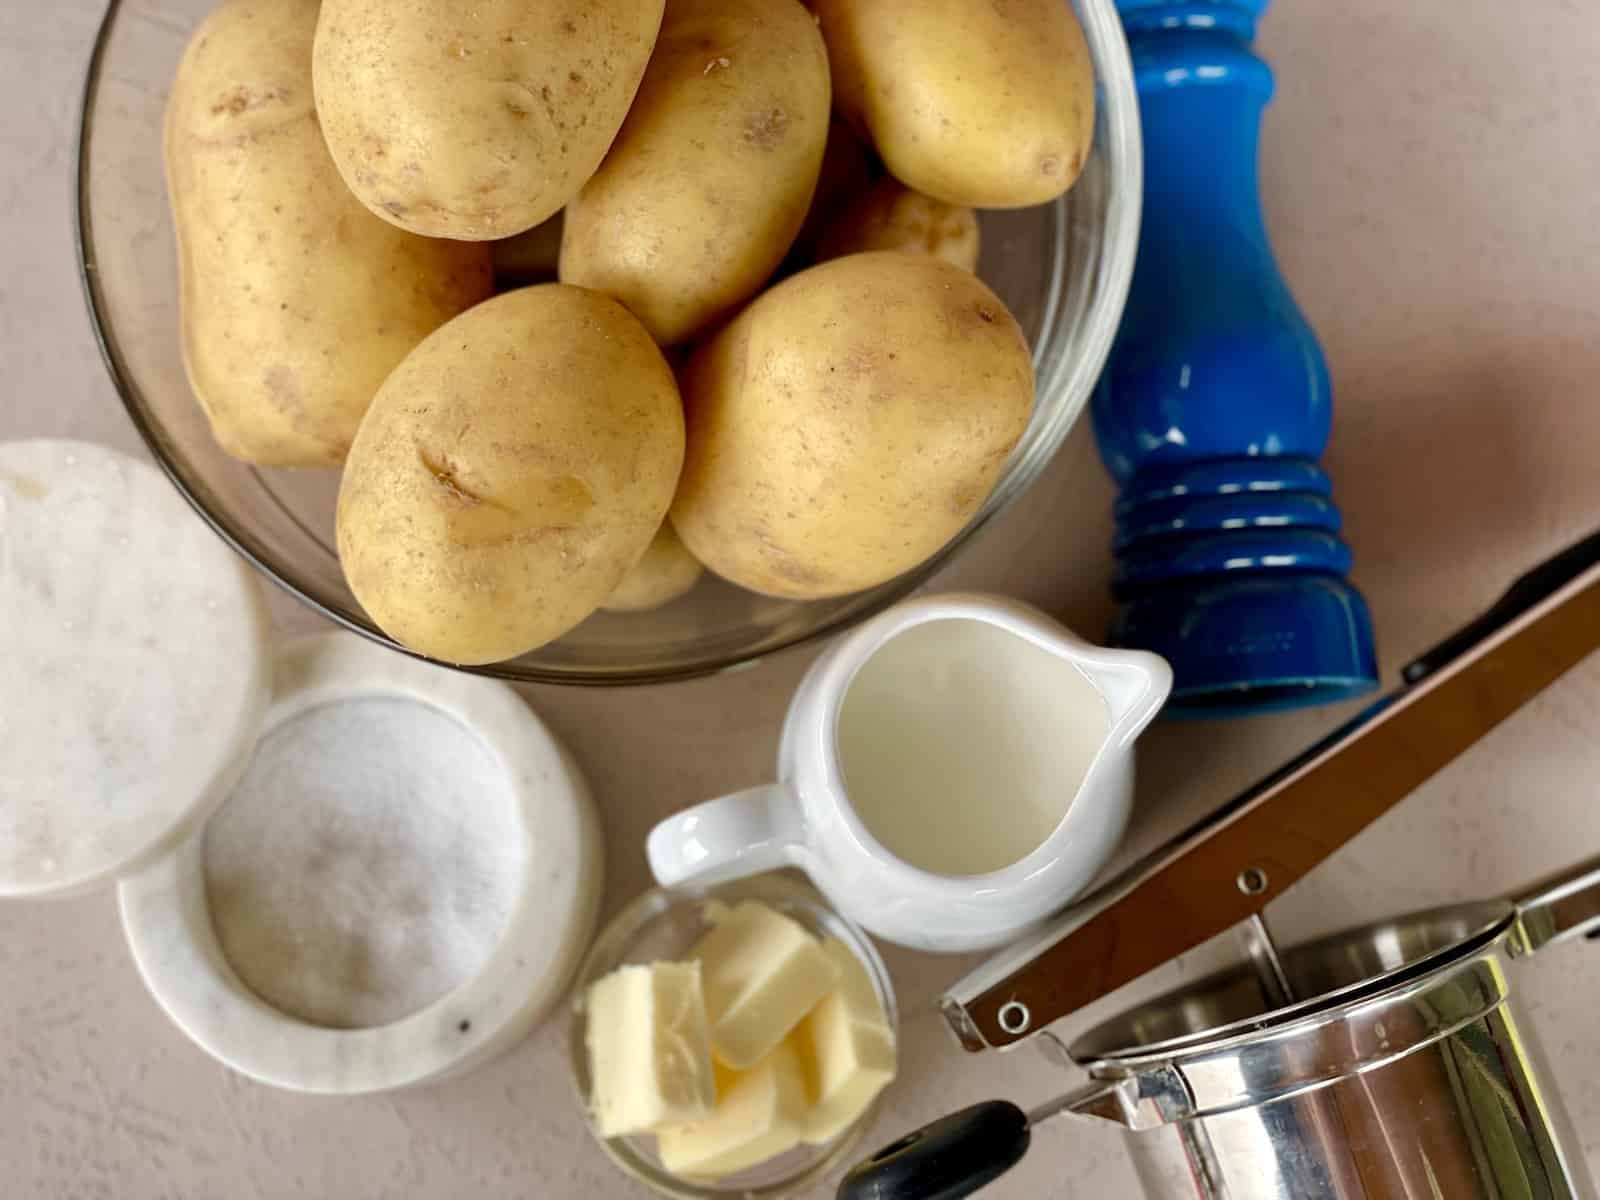 a bowl of yukon gold potatoes next to a salt jar cream in a white pitcher small bowl of butter a blue pepper grinder and ricer